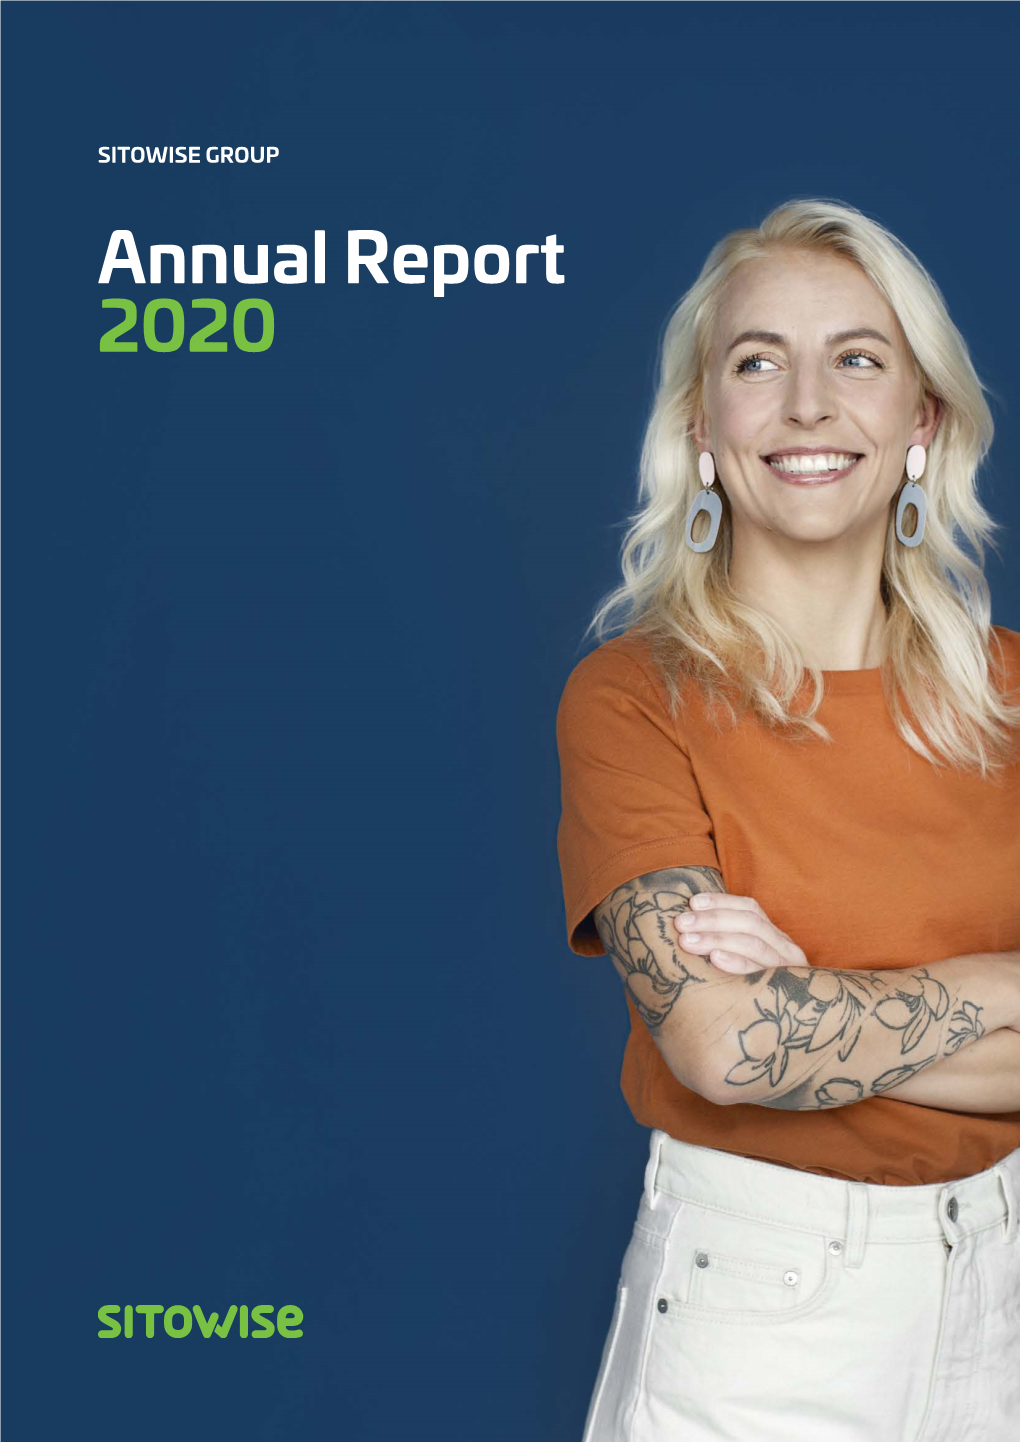 Annual Report 2020 Sitowise Is a Nordic Expert in the Built Environment with a Strong Focus on Digitality